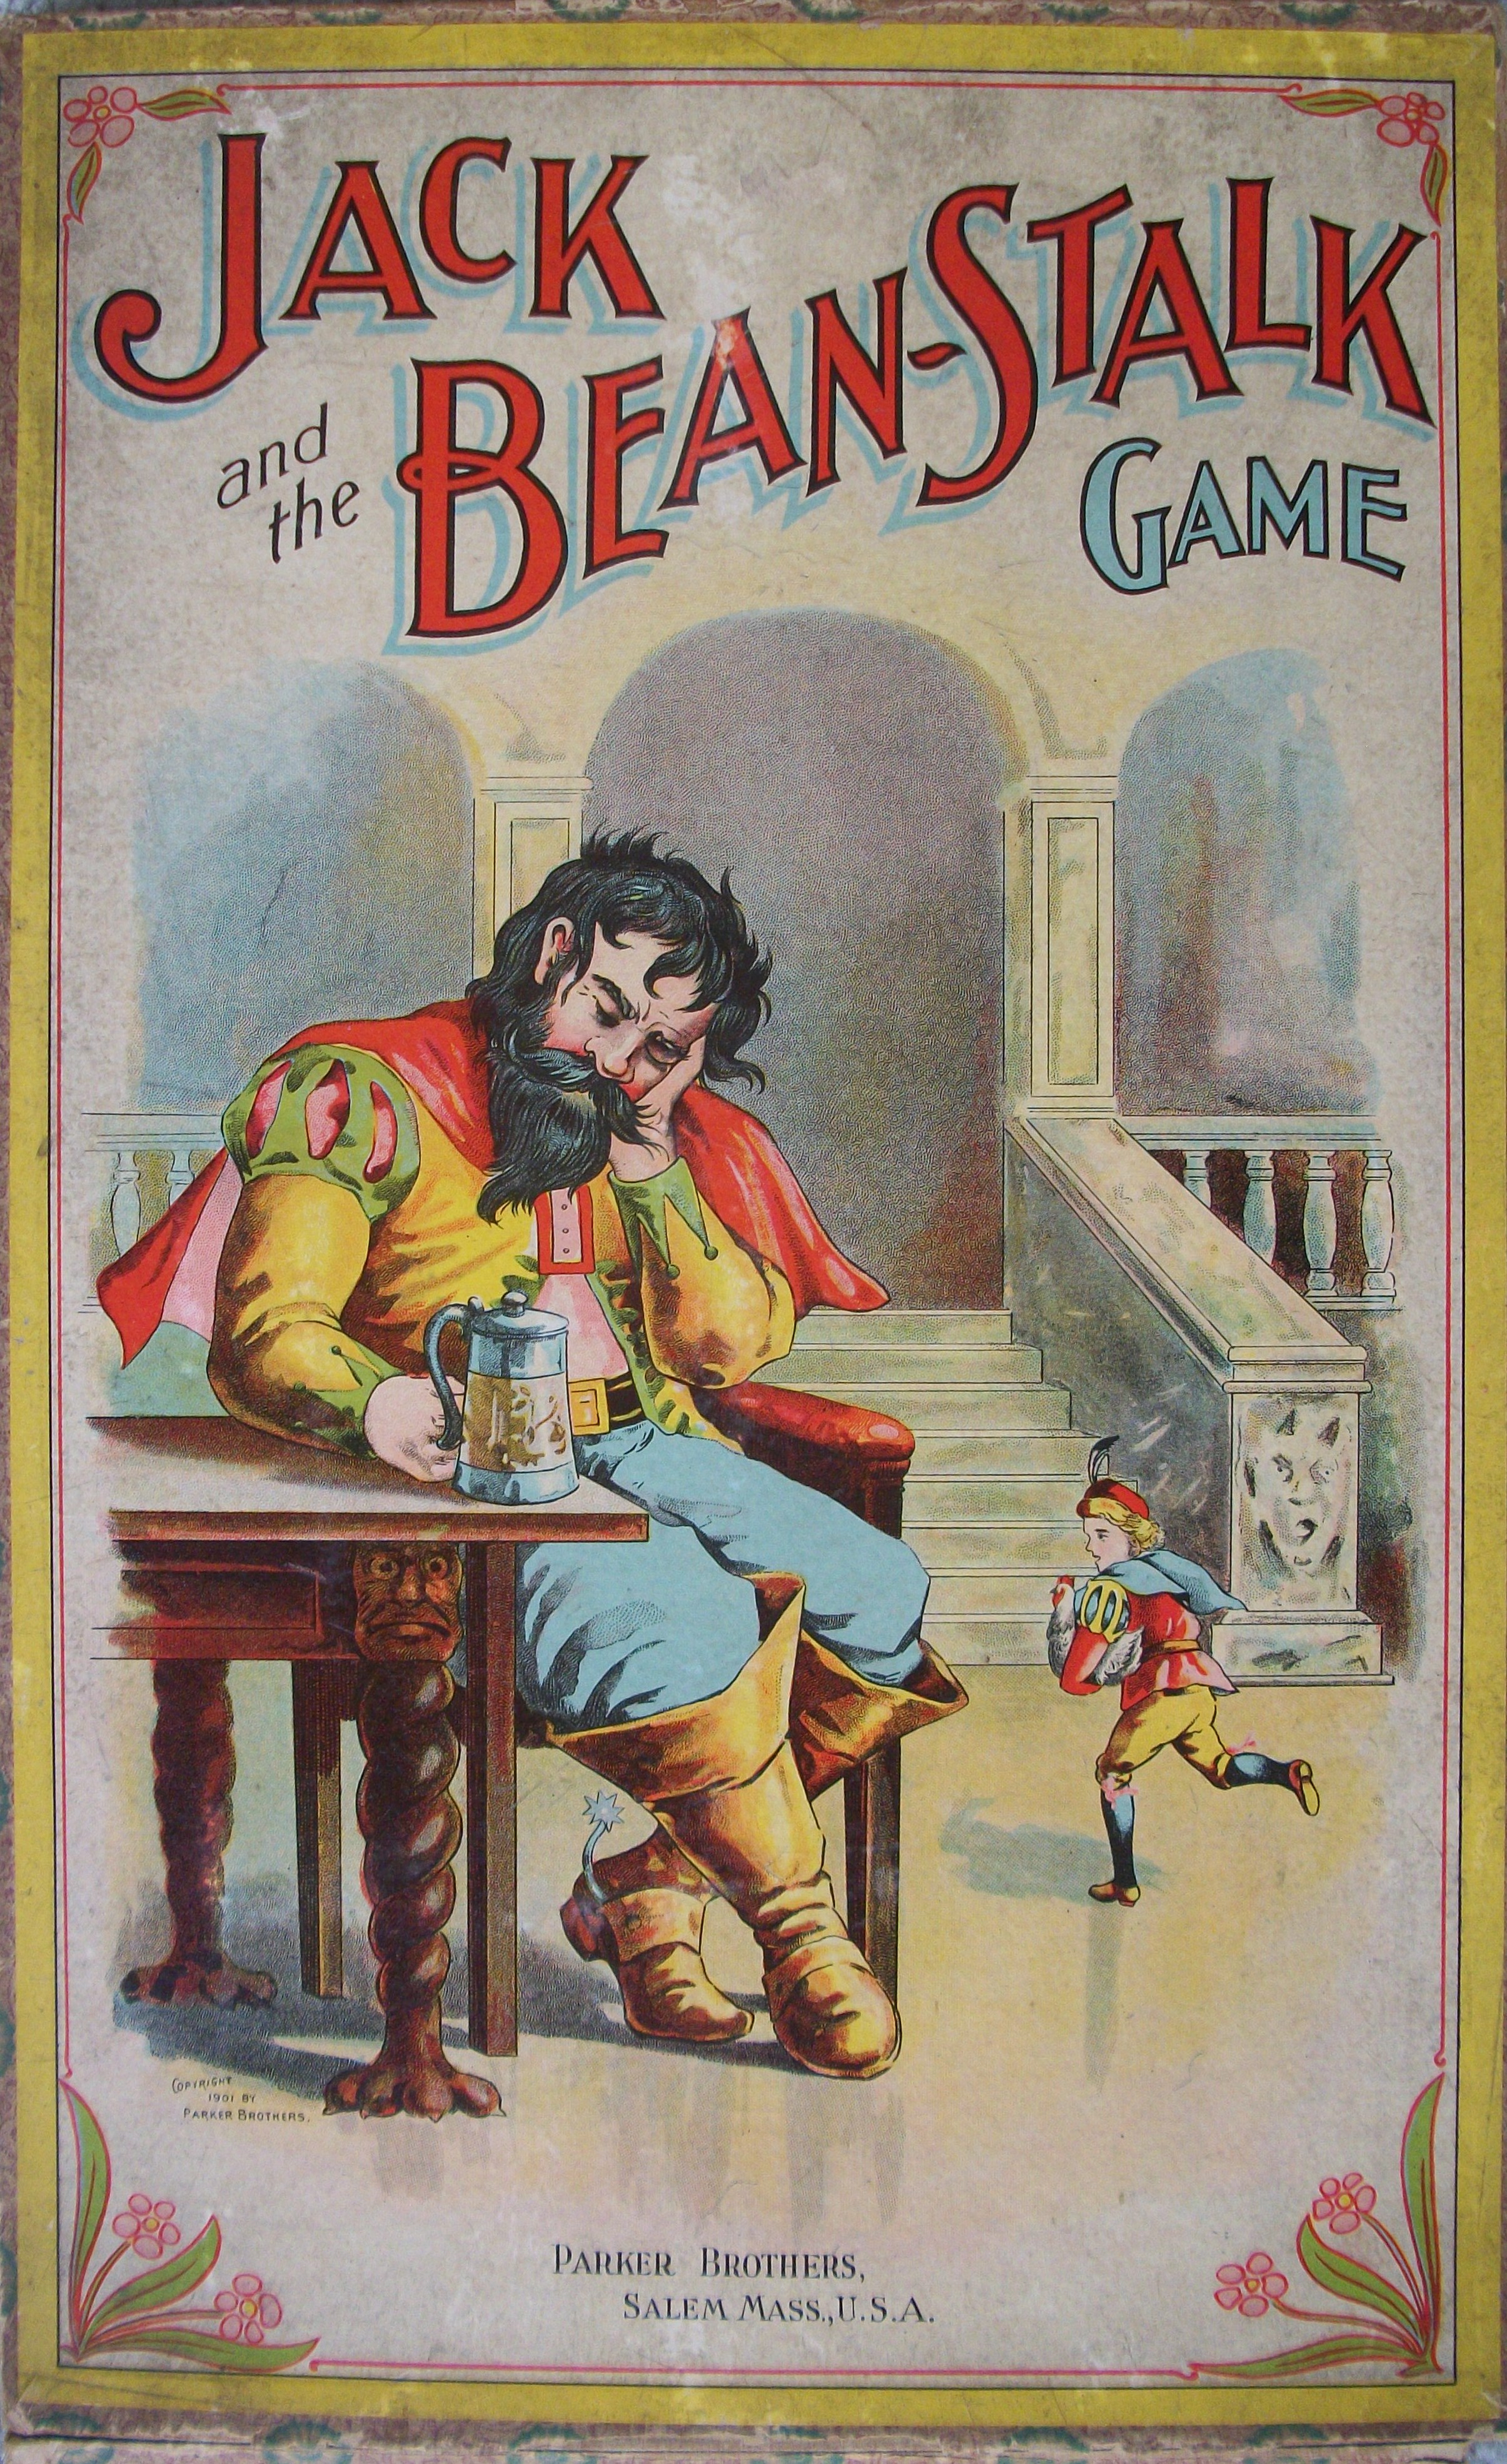 Antique Game of Jack and the Beanstalk